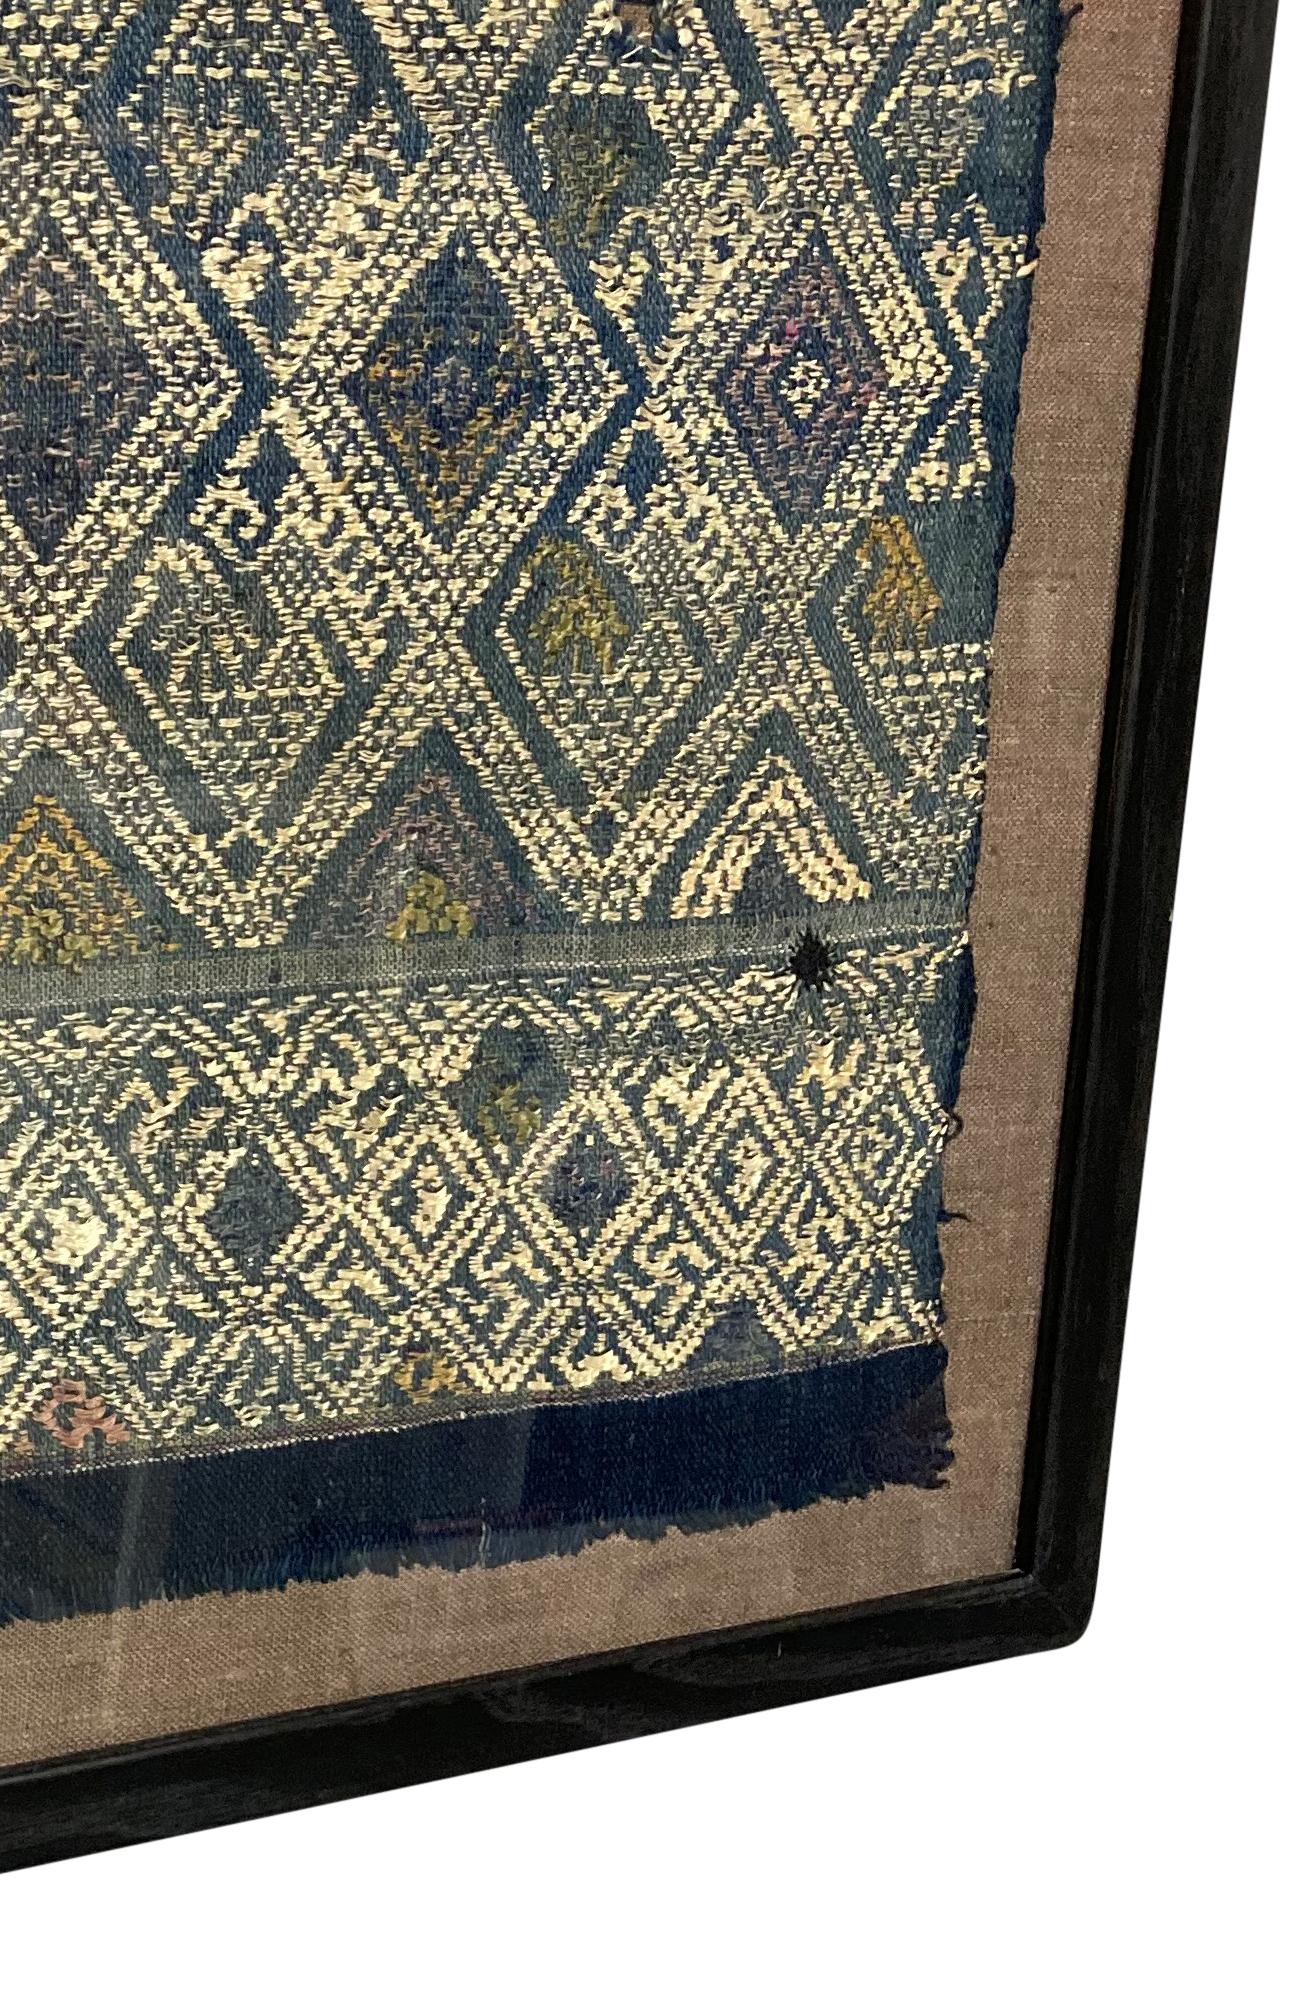 Framed Antique Guiqzou Province Textile In Good Condition For Sale In London, GB